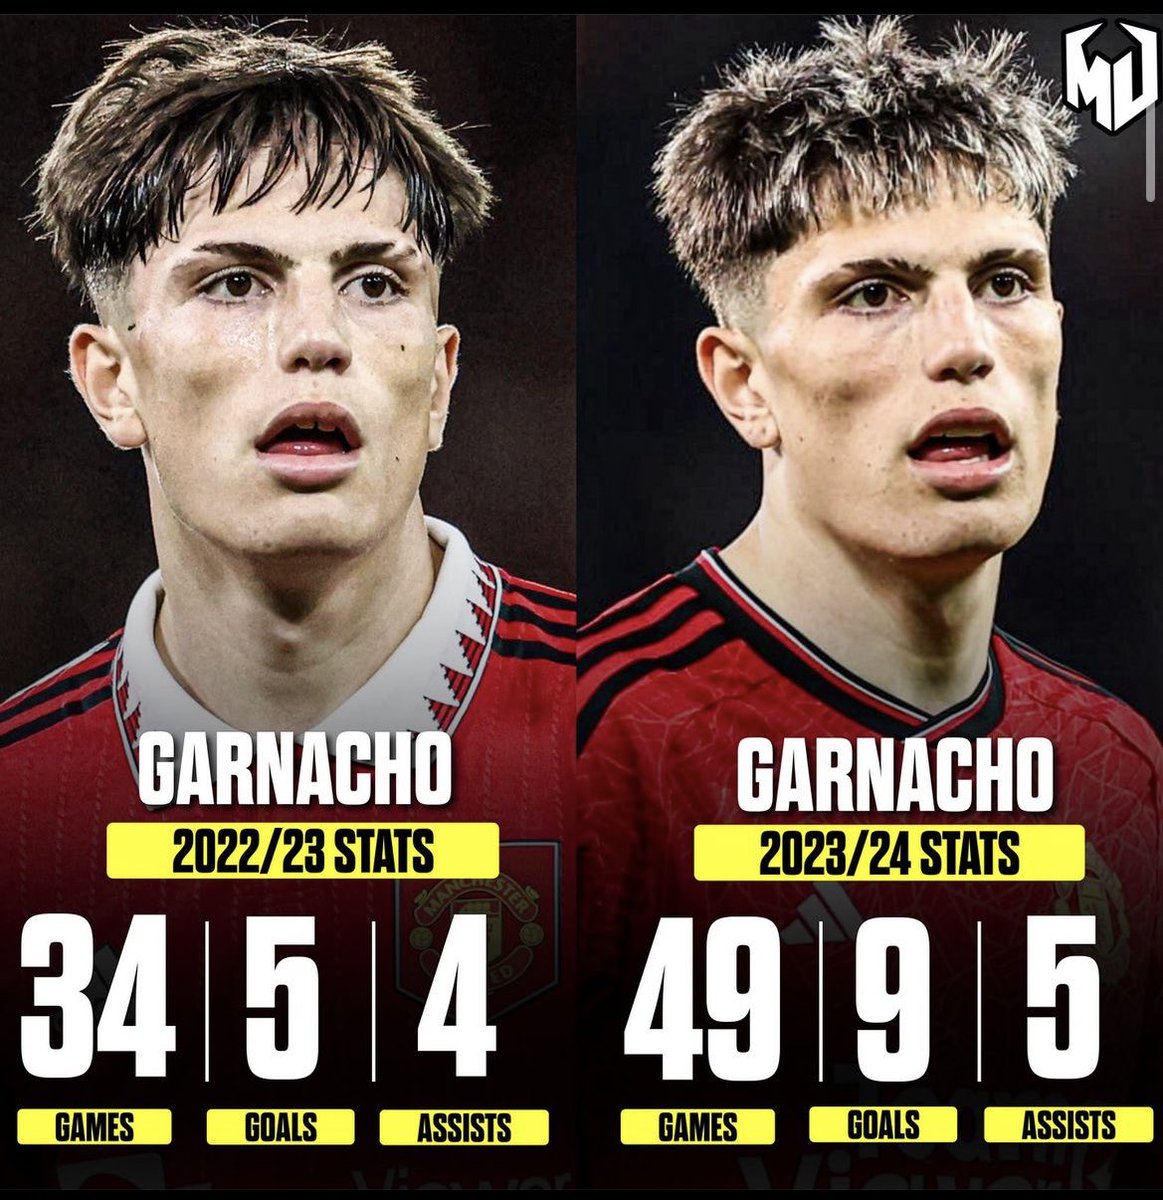 Wow, pretty nice development from Garnacho this season. People forget he’s still a teenager!